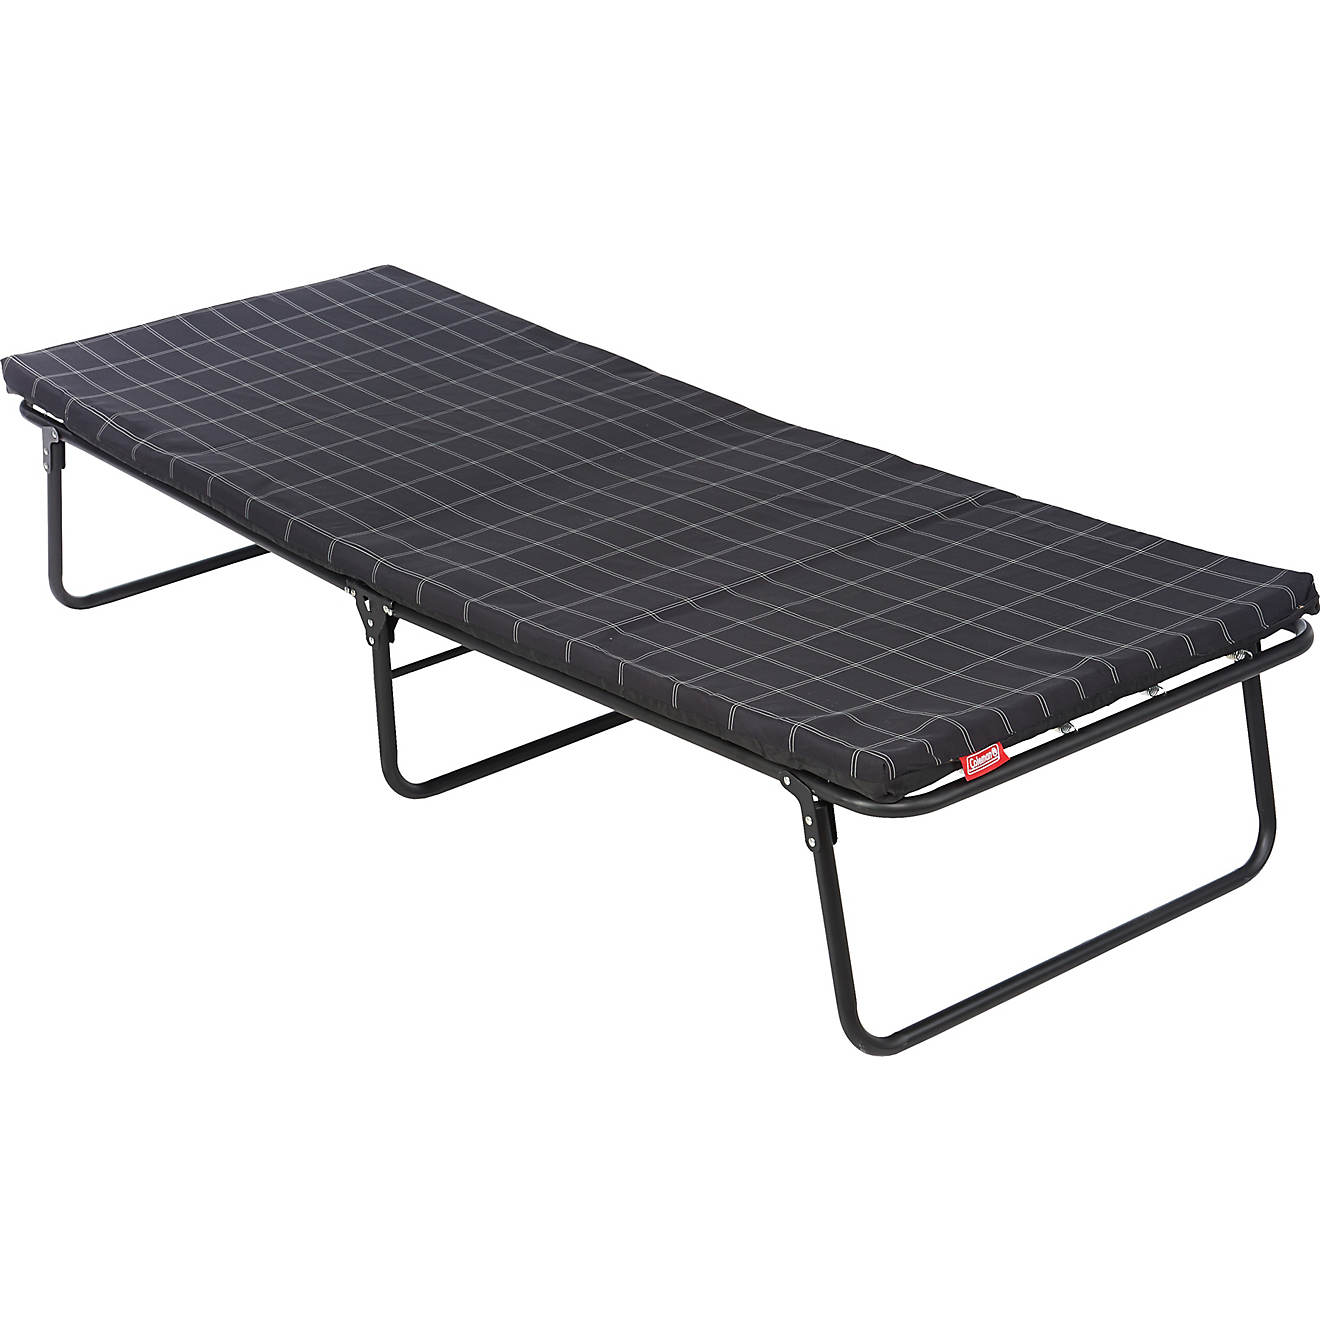 Coleman ComfortSmart Deluxe Camping Cot Folding bed-like support for air bed 